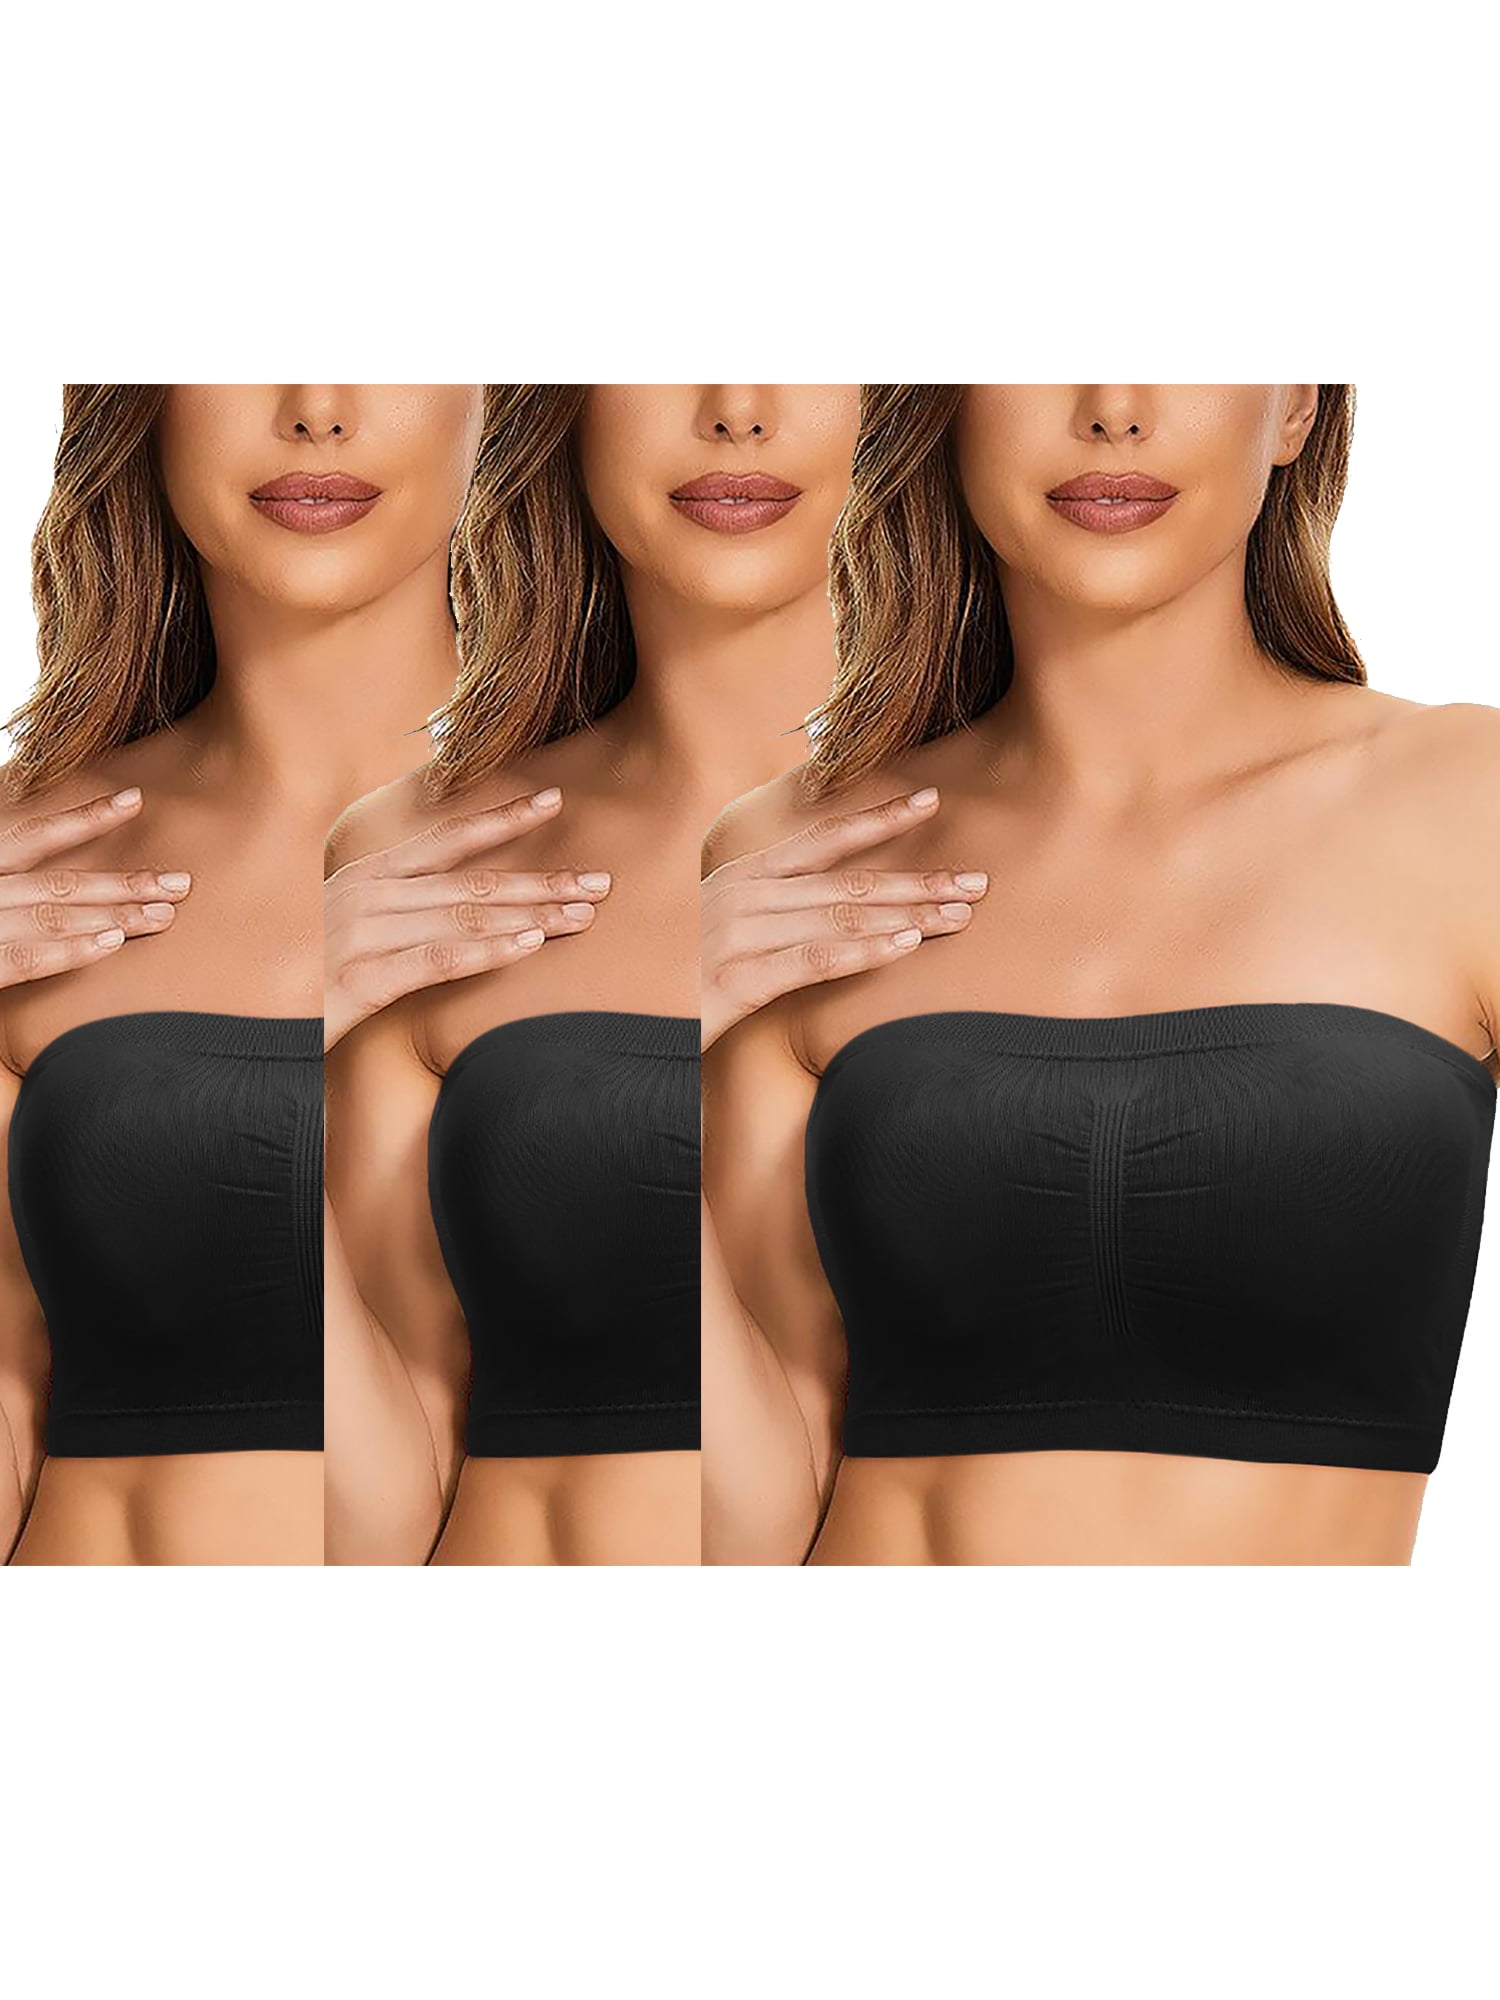 Buy MIXCART Bralette Tube Bra Bandeau top Without Hook Ultra Thin